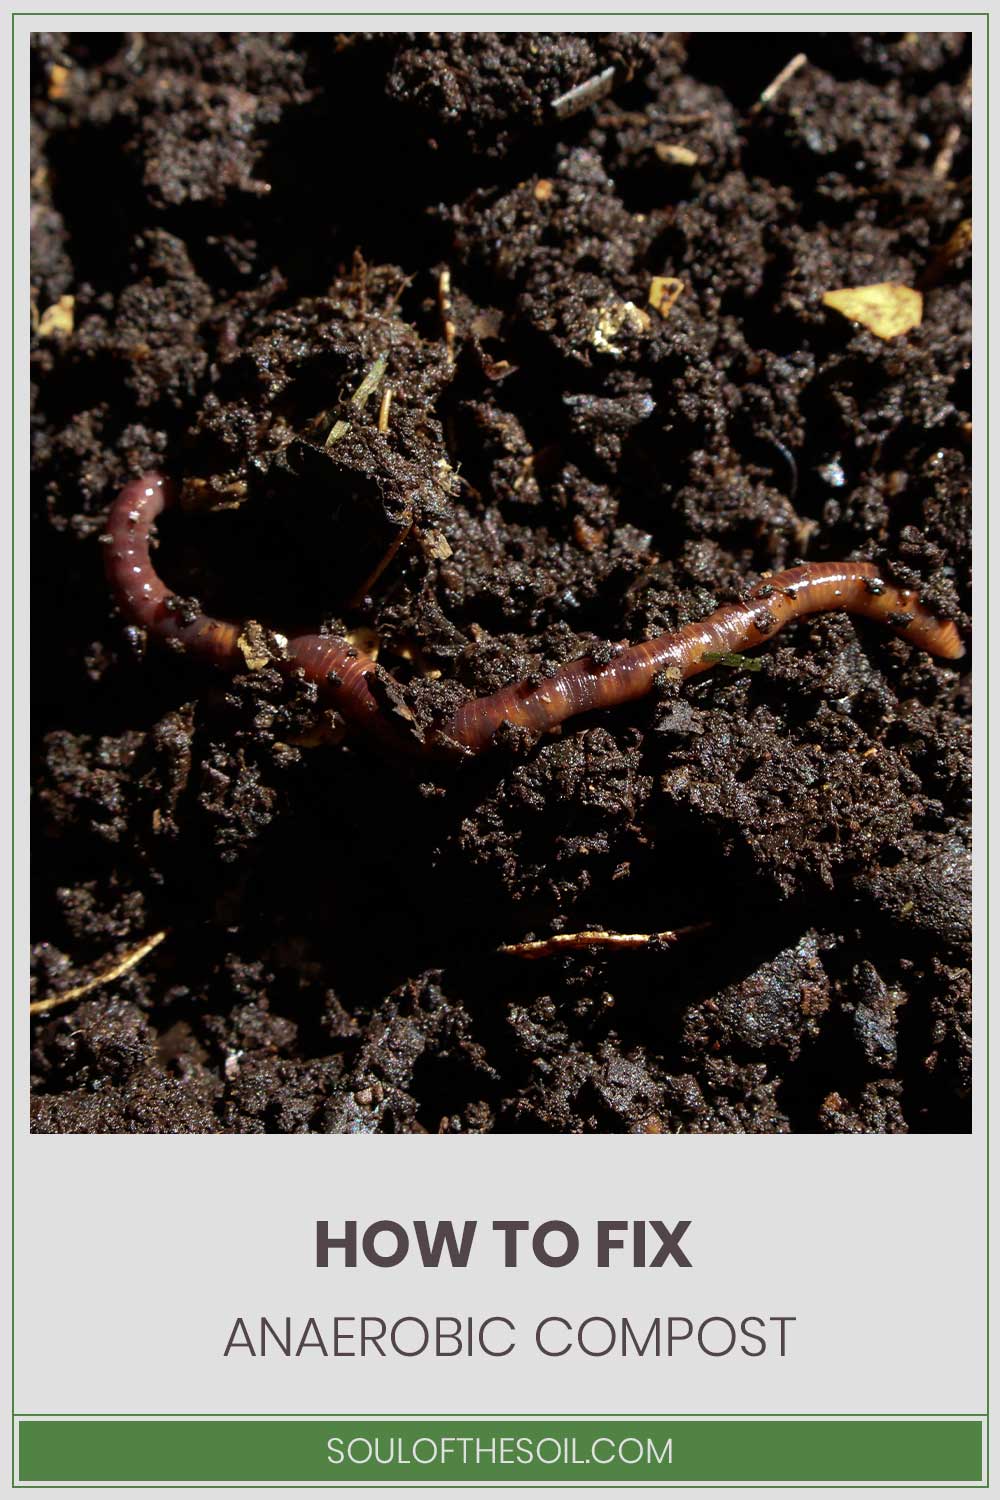 How to Fix Anaerobic Compost